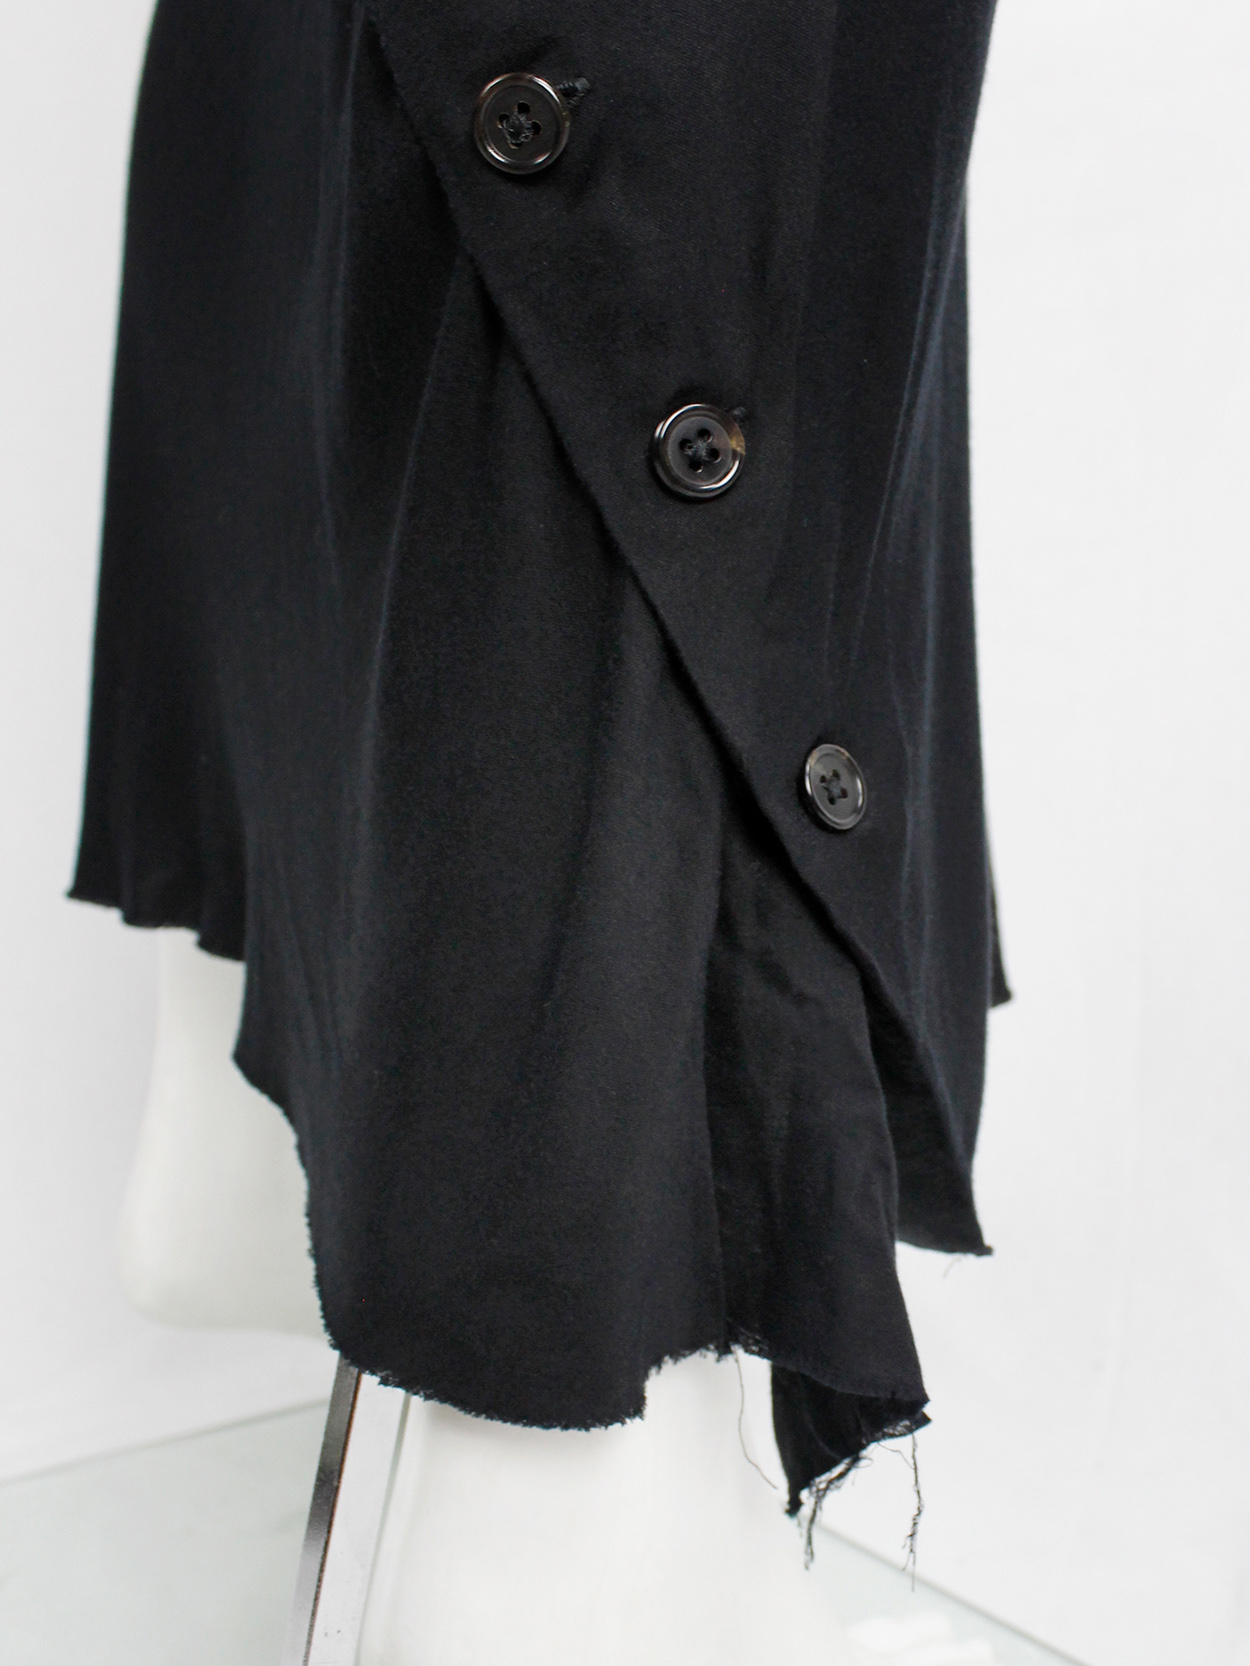 Ann Demeulemeester black maxi skirt with buttons twisting around it fall 2010 (11)